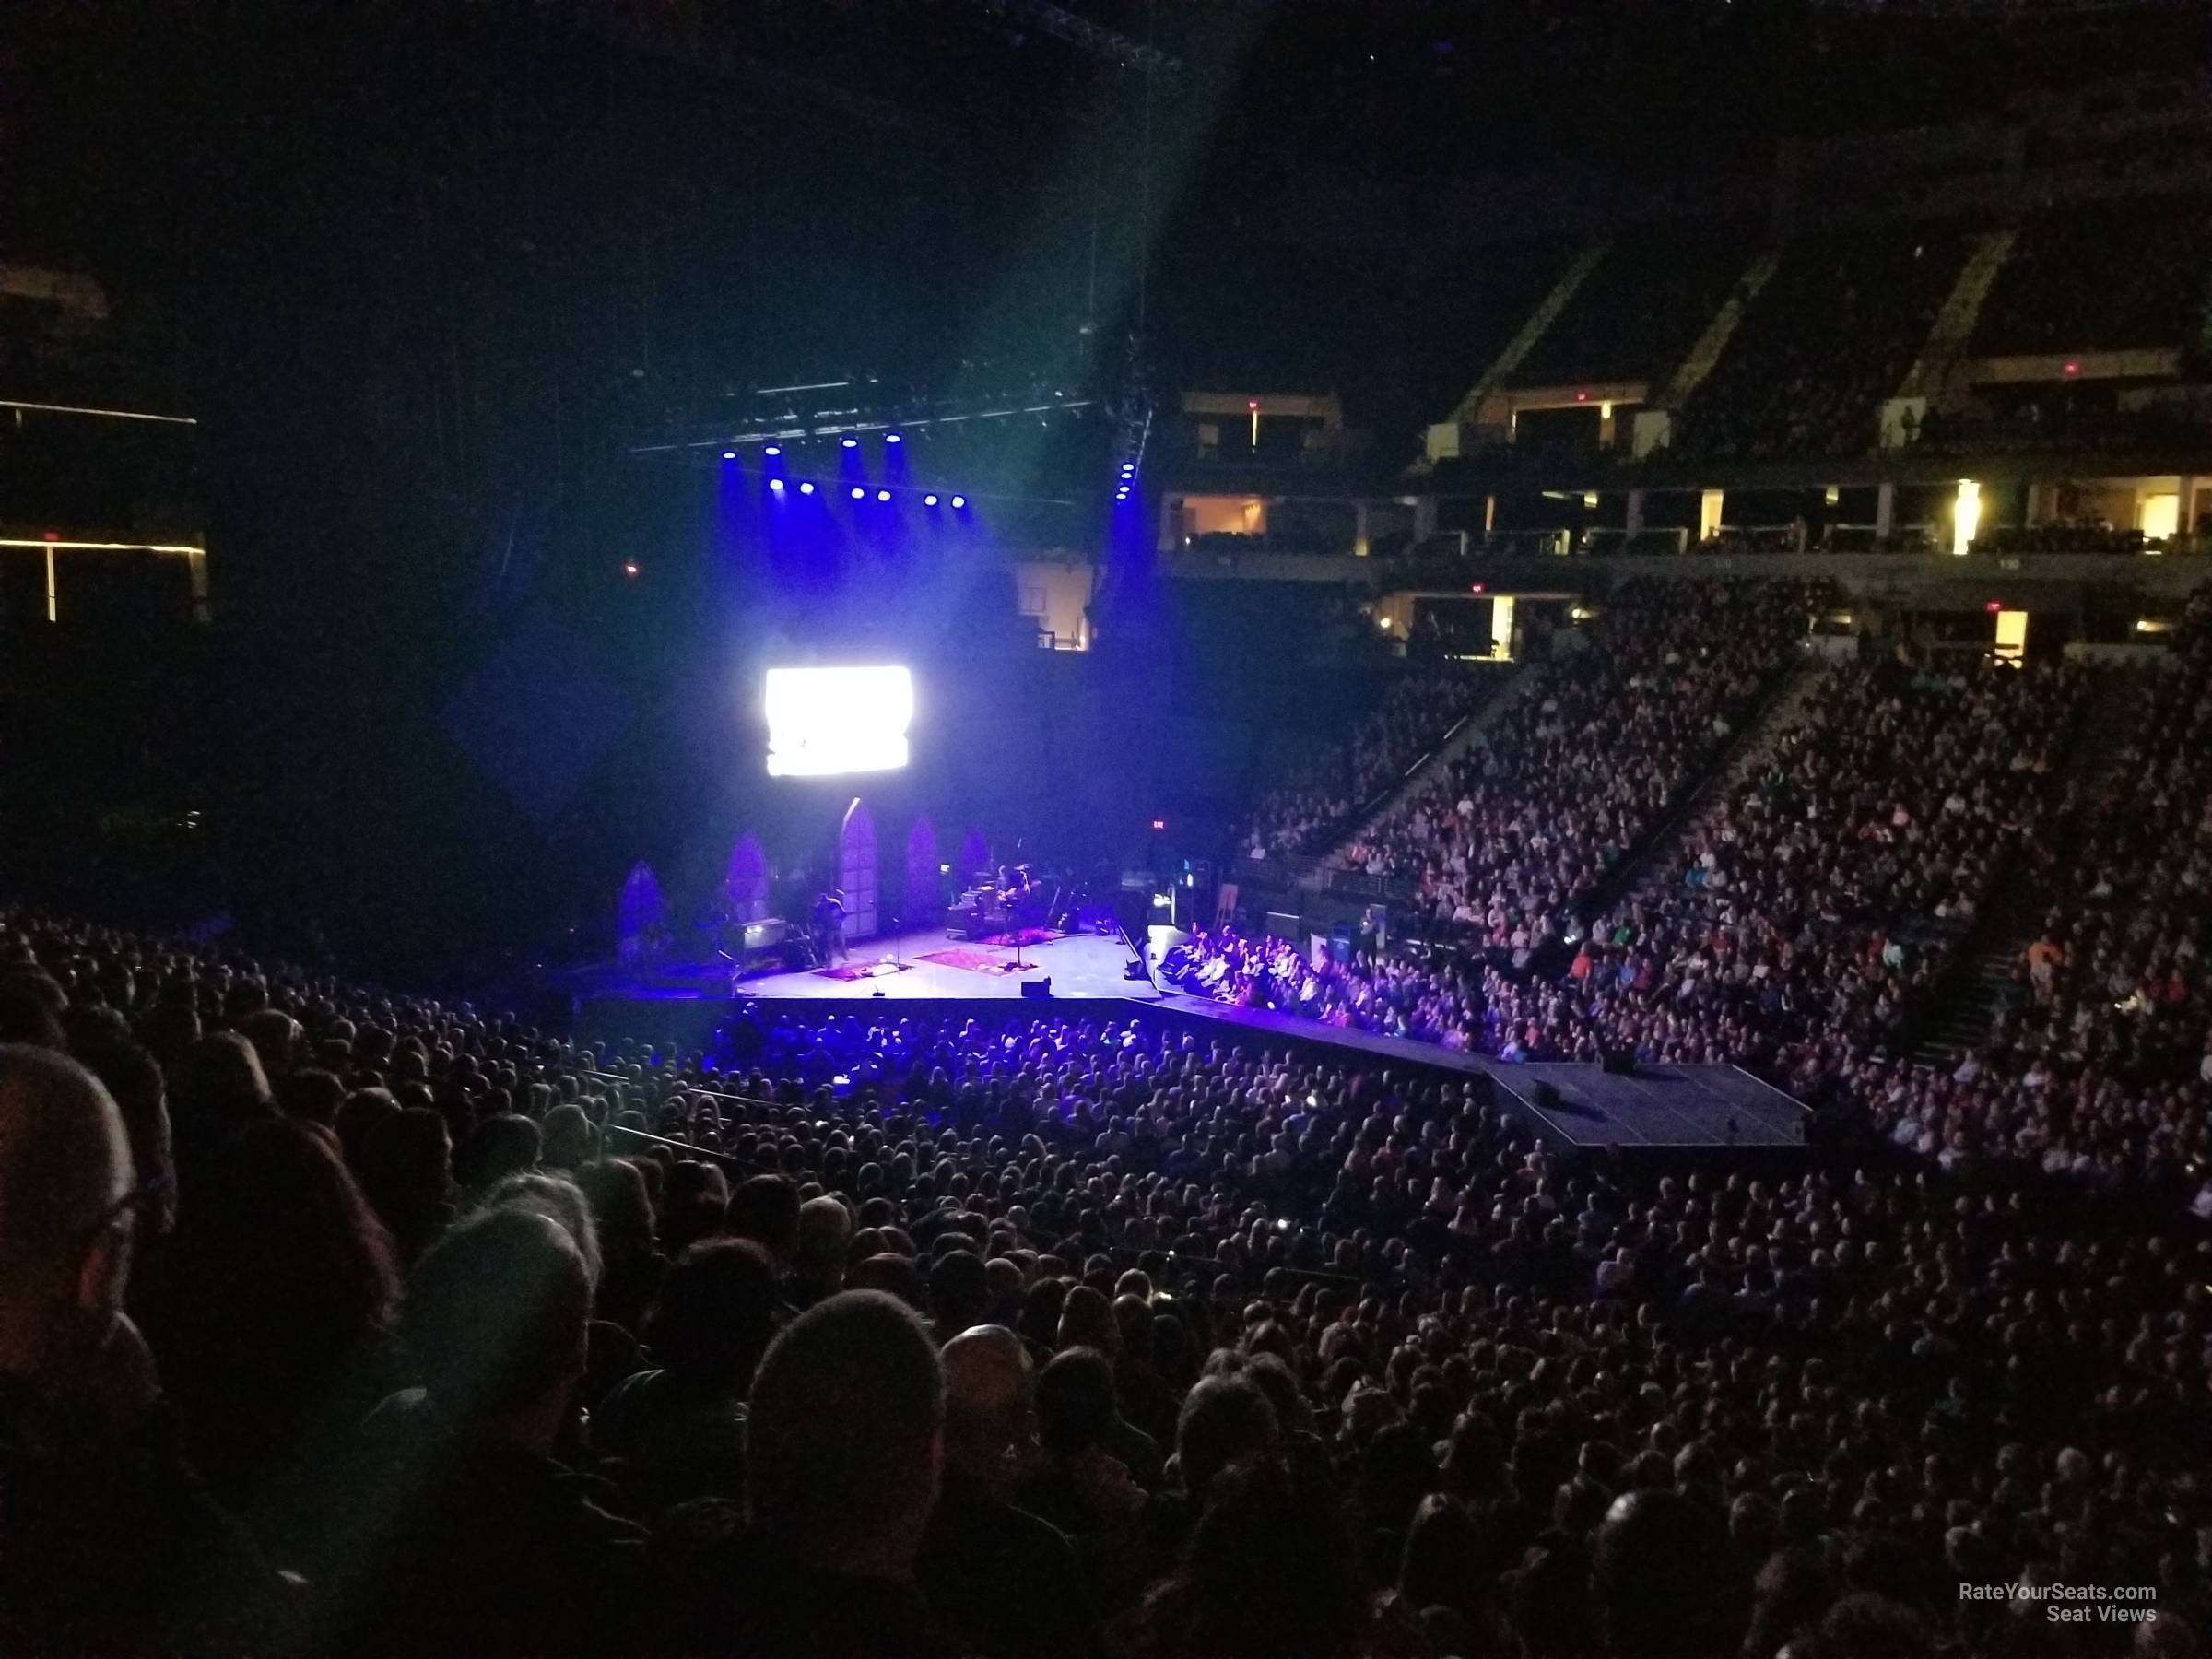 Section 111 at Target Center for Concerts - RateYourSeats.com